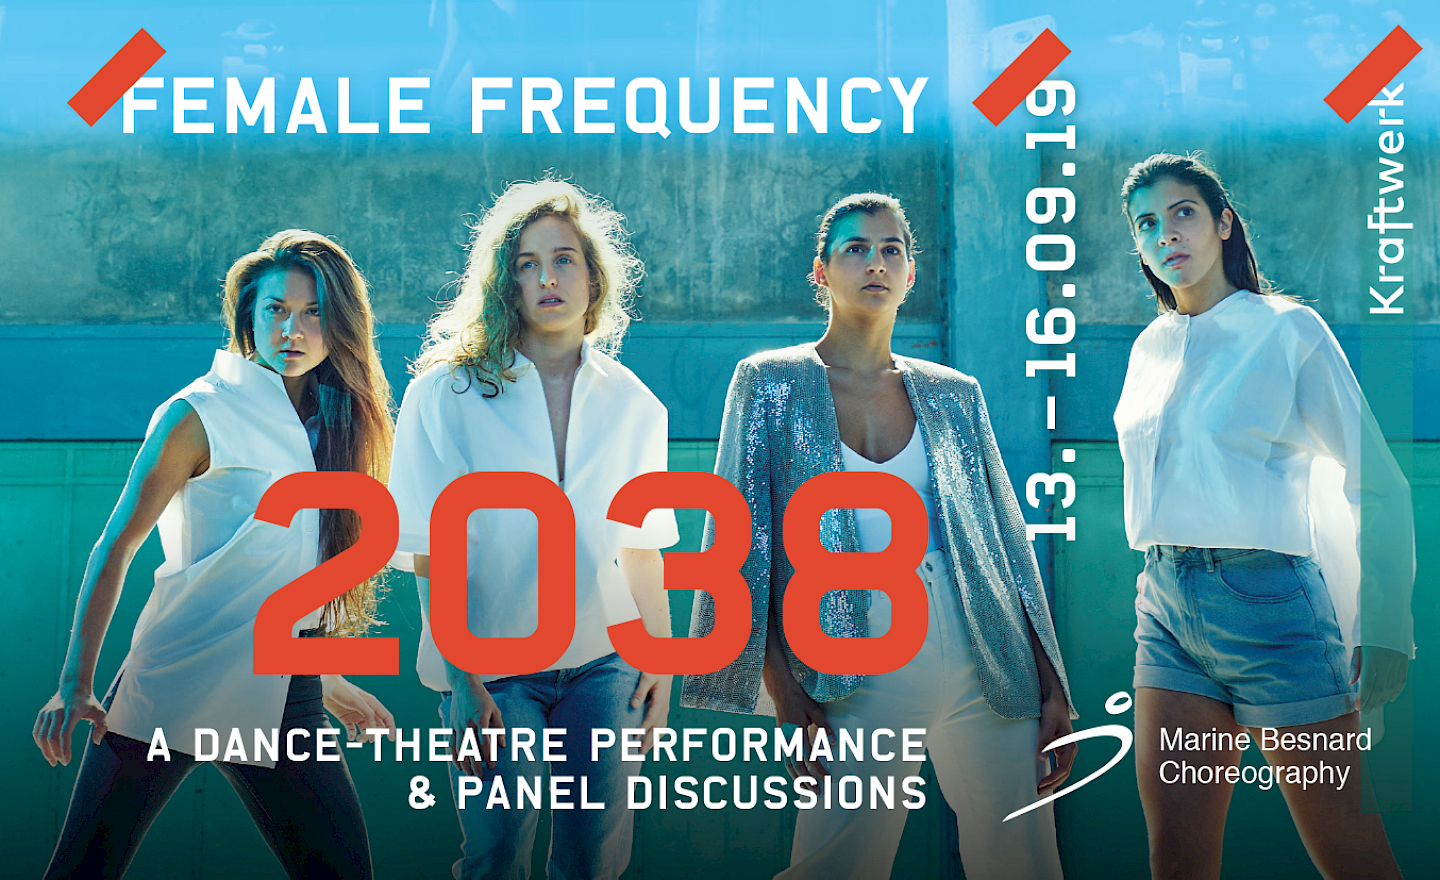 2038 - Female Frequency